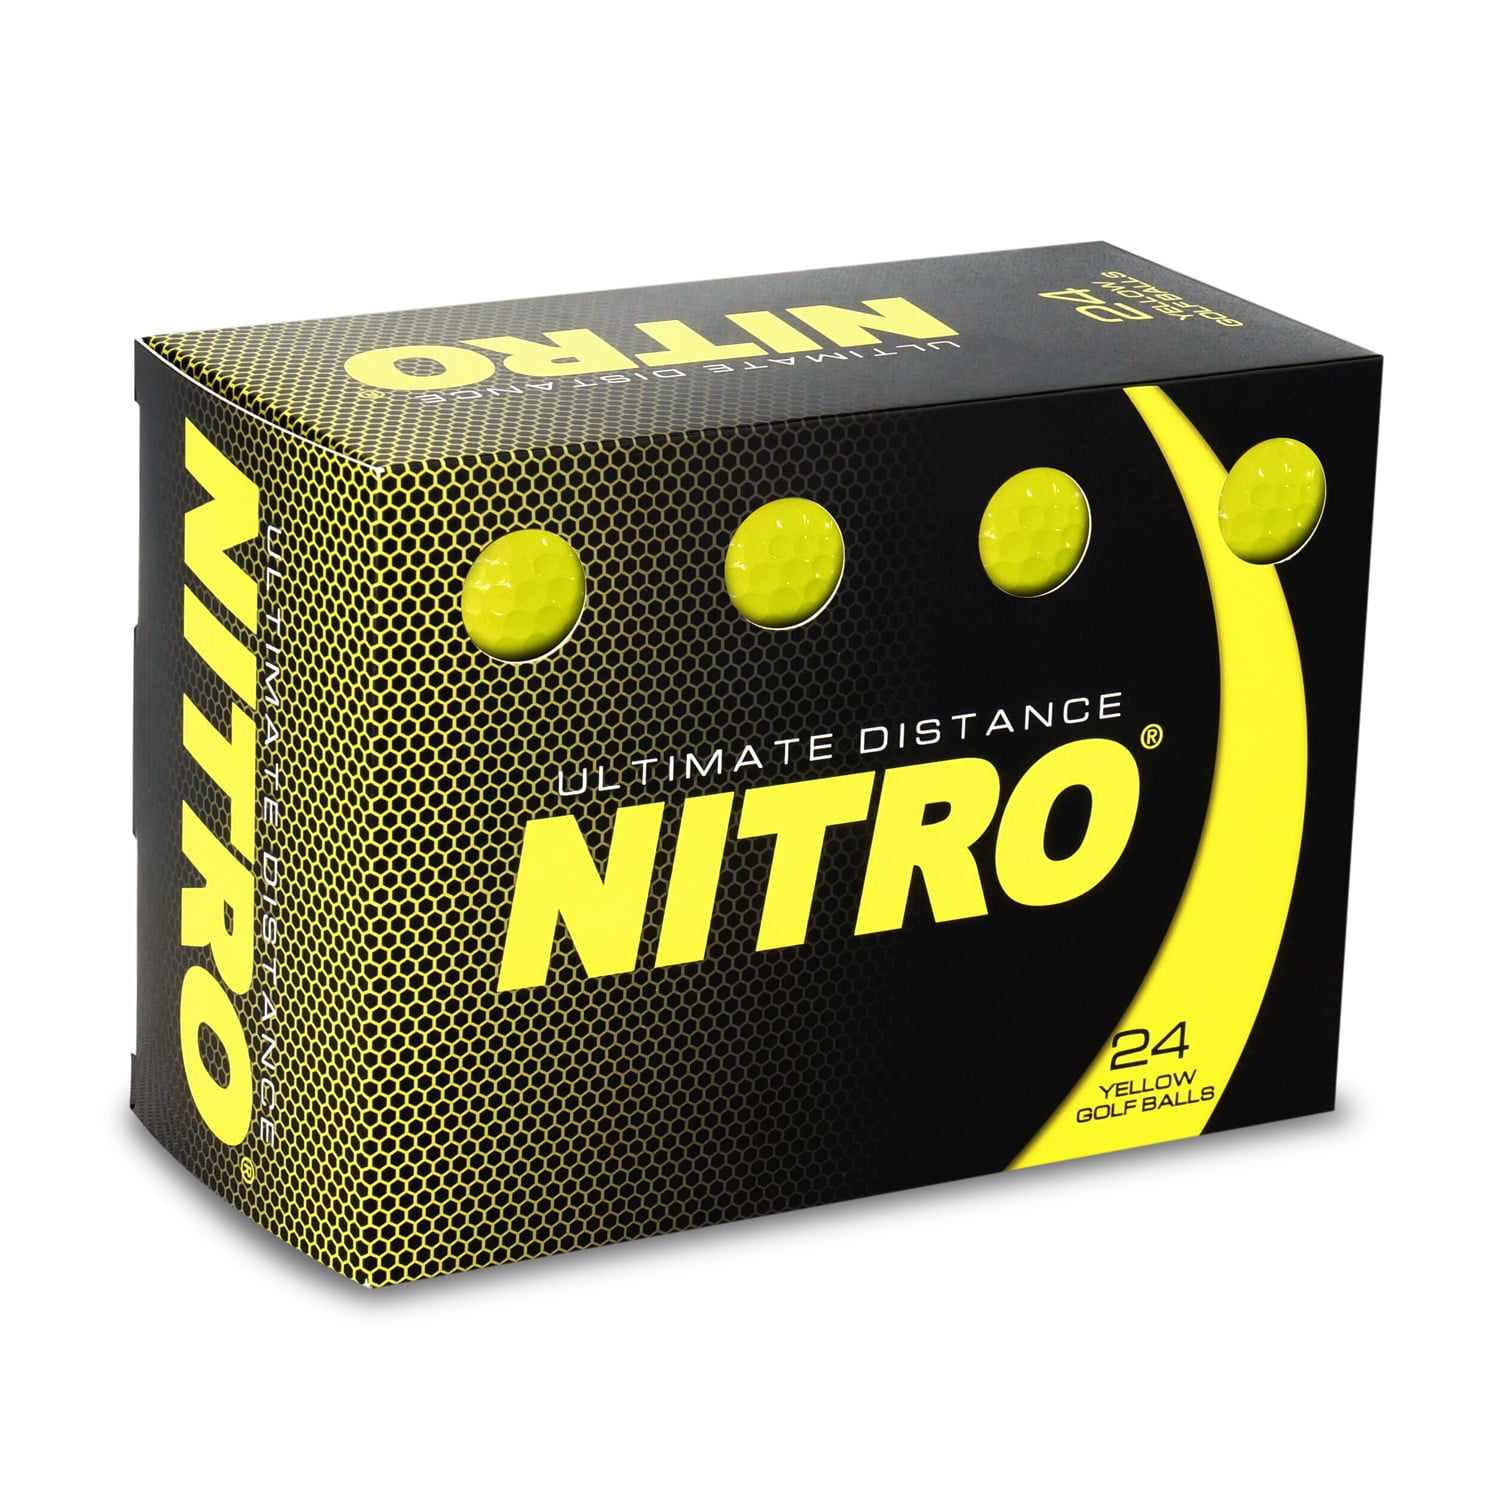 Nitro Golf Ultimate Distance Golf Ball, 24-Pack, Yellow